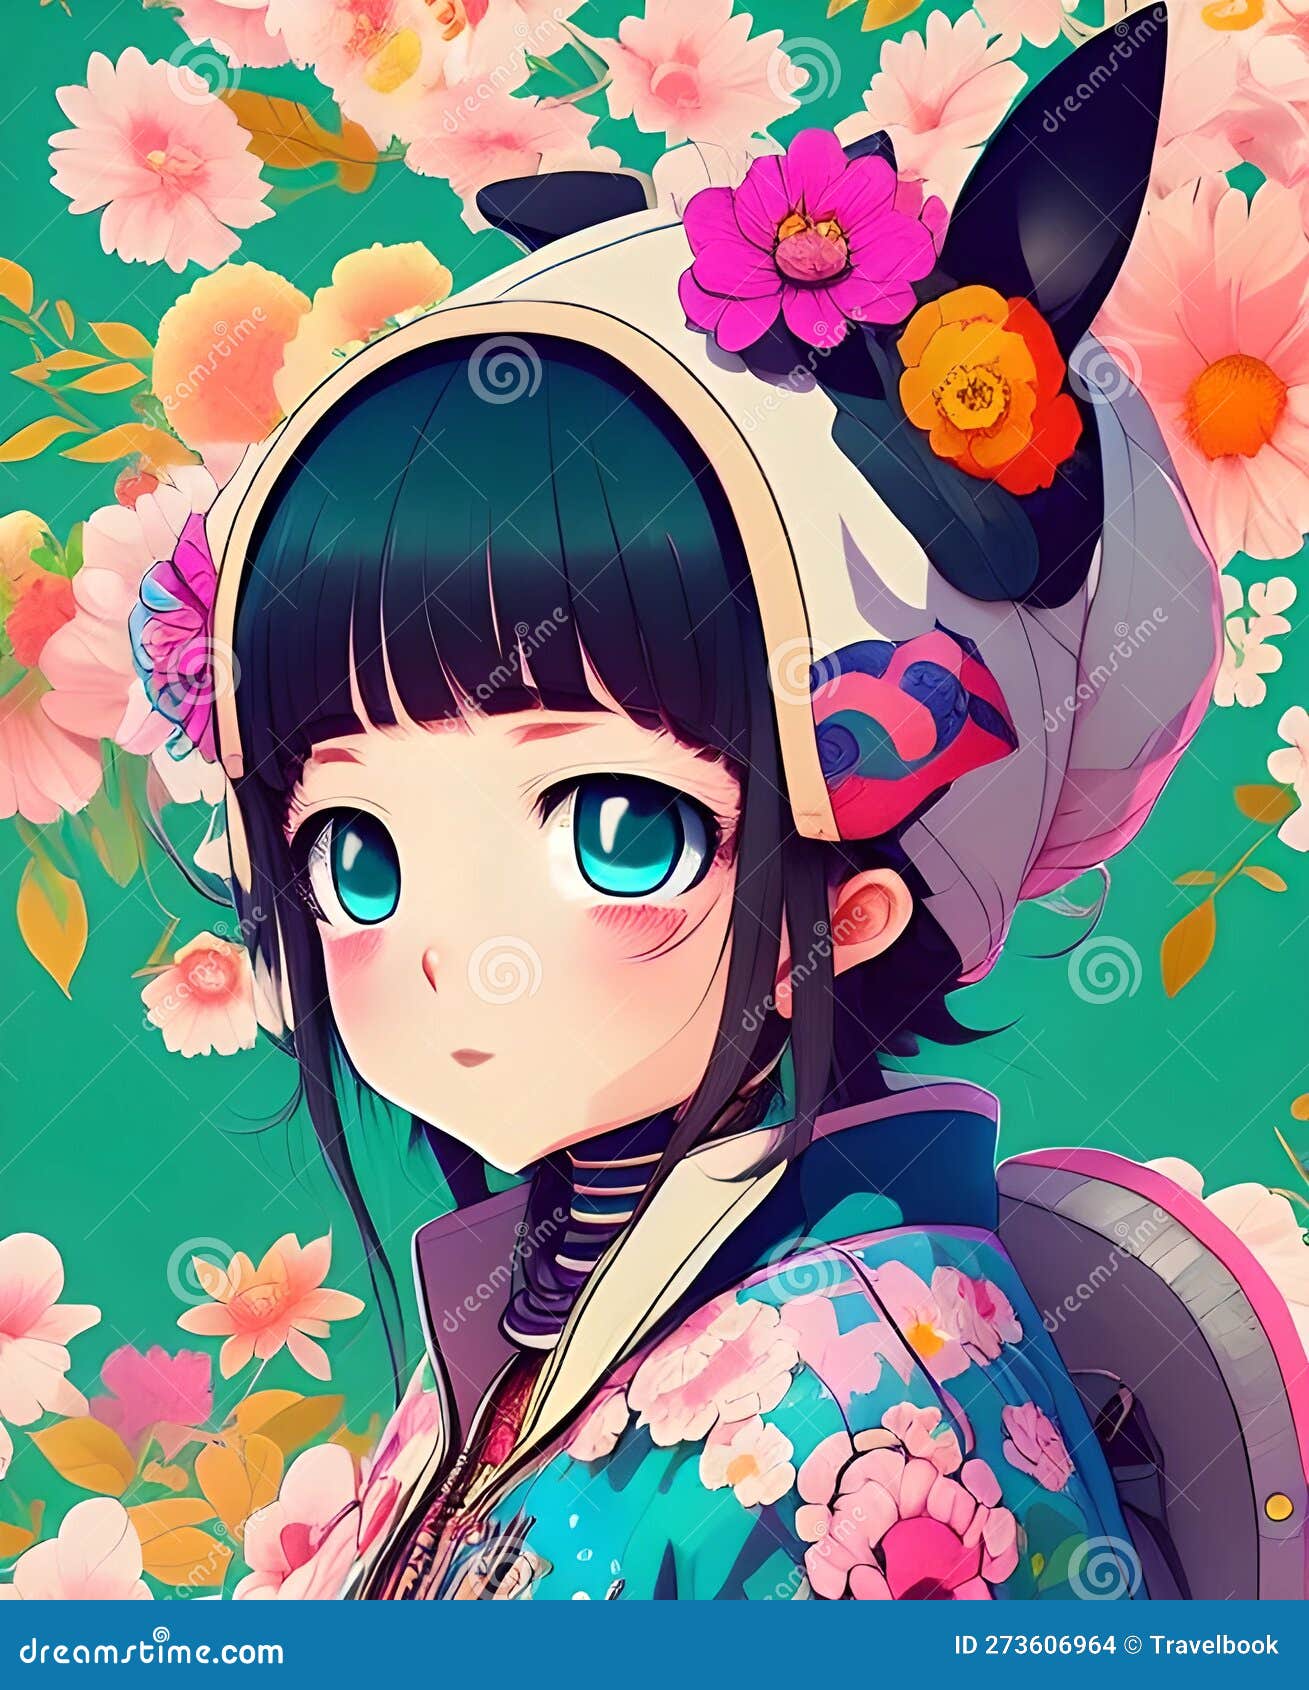 Anime girl with flowers